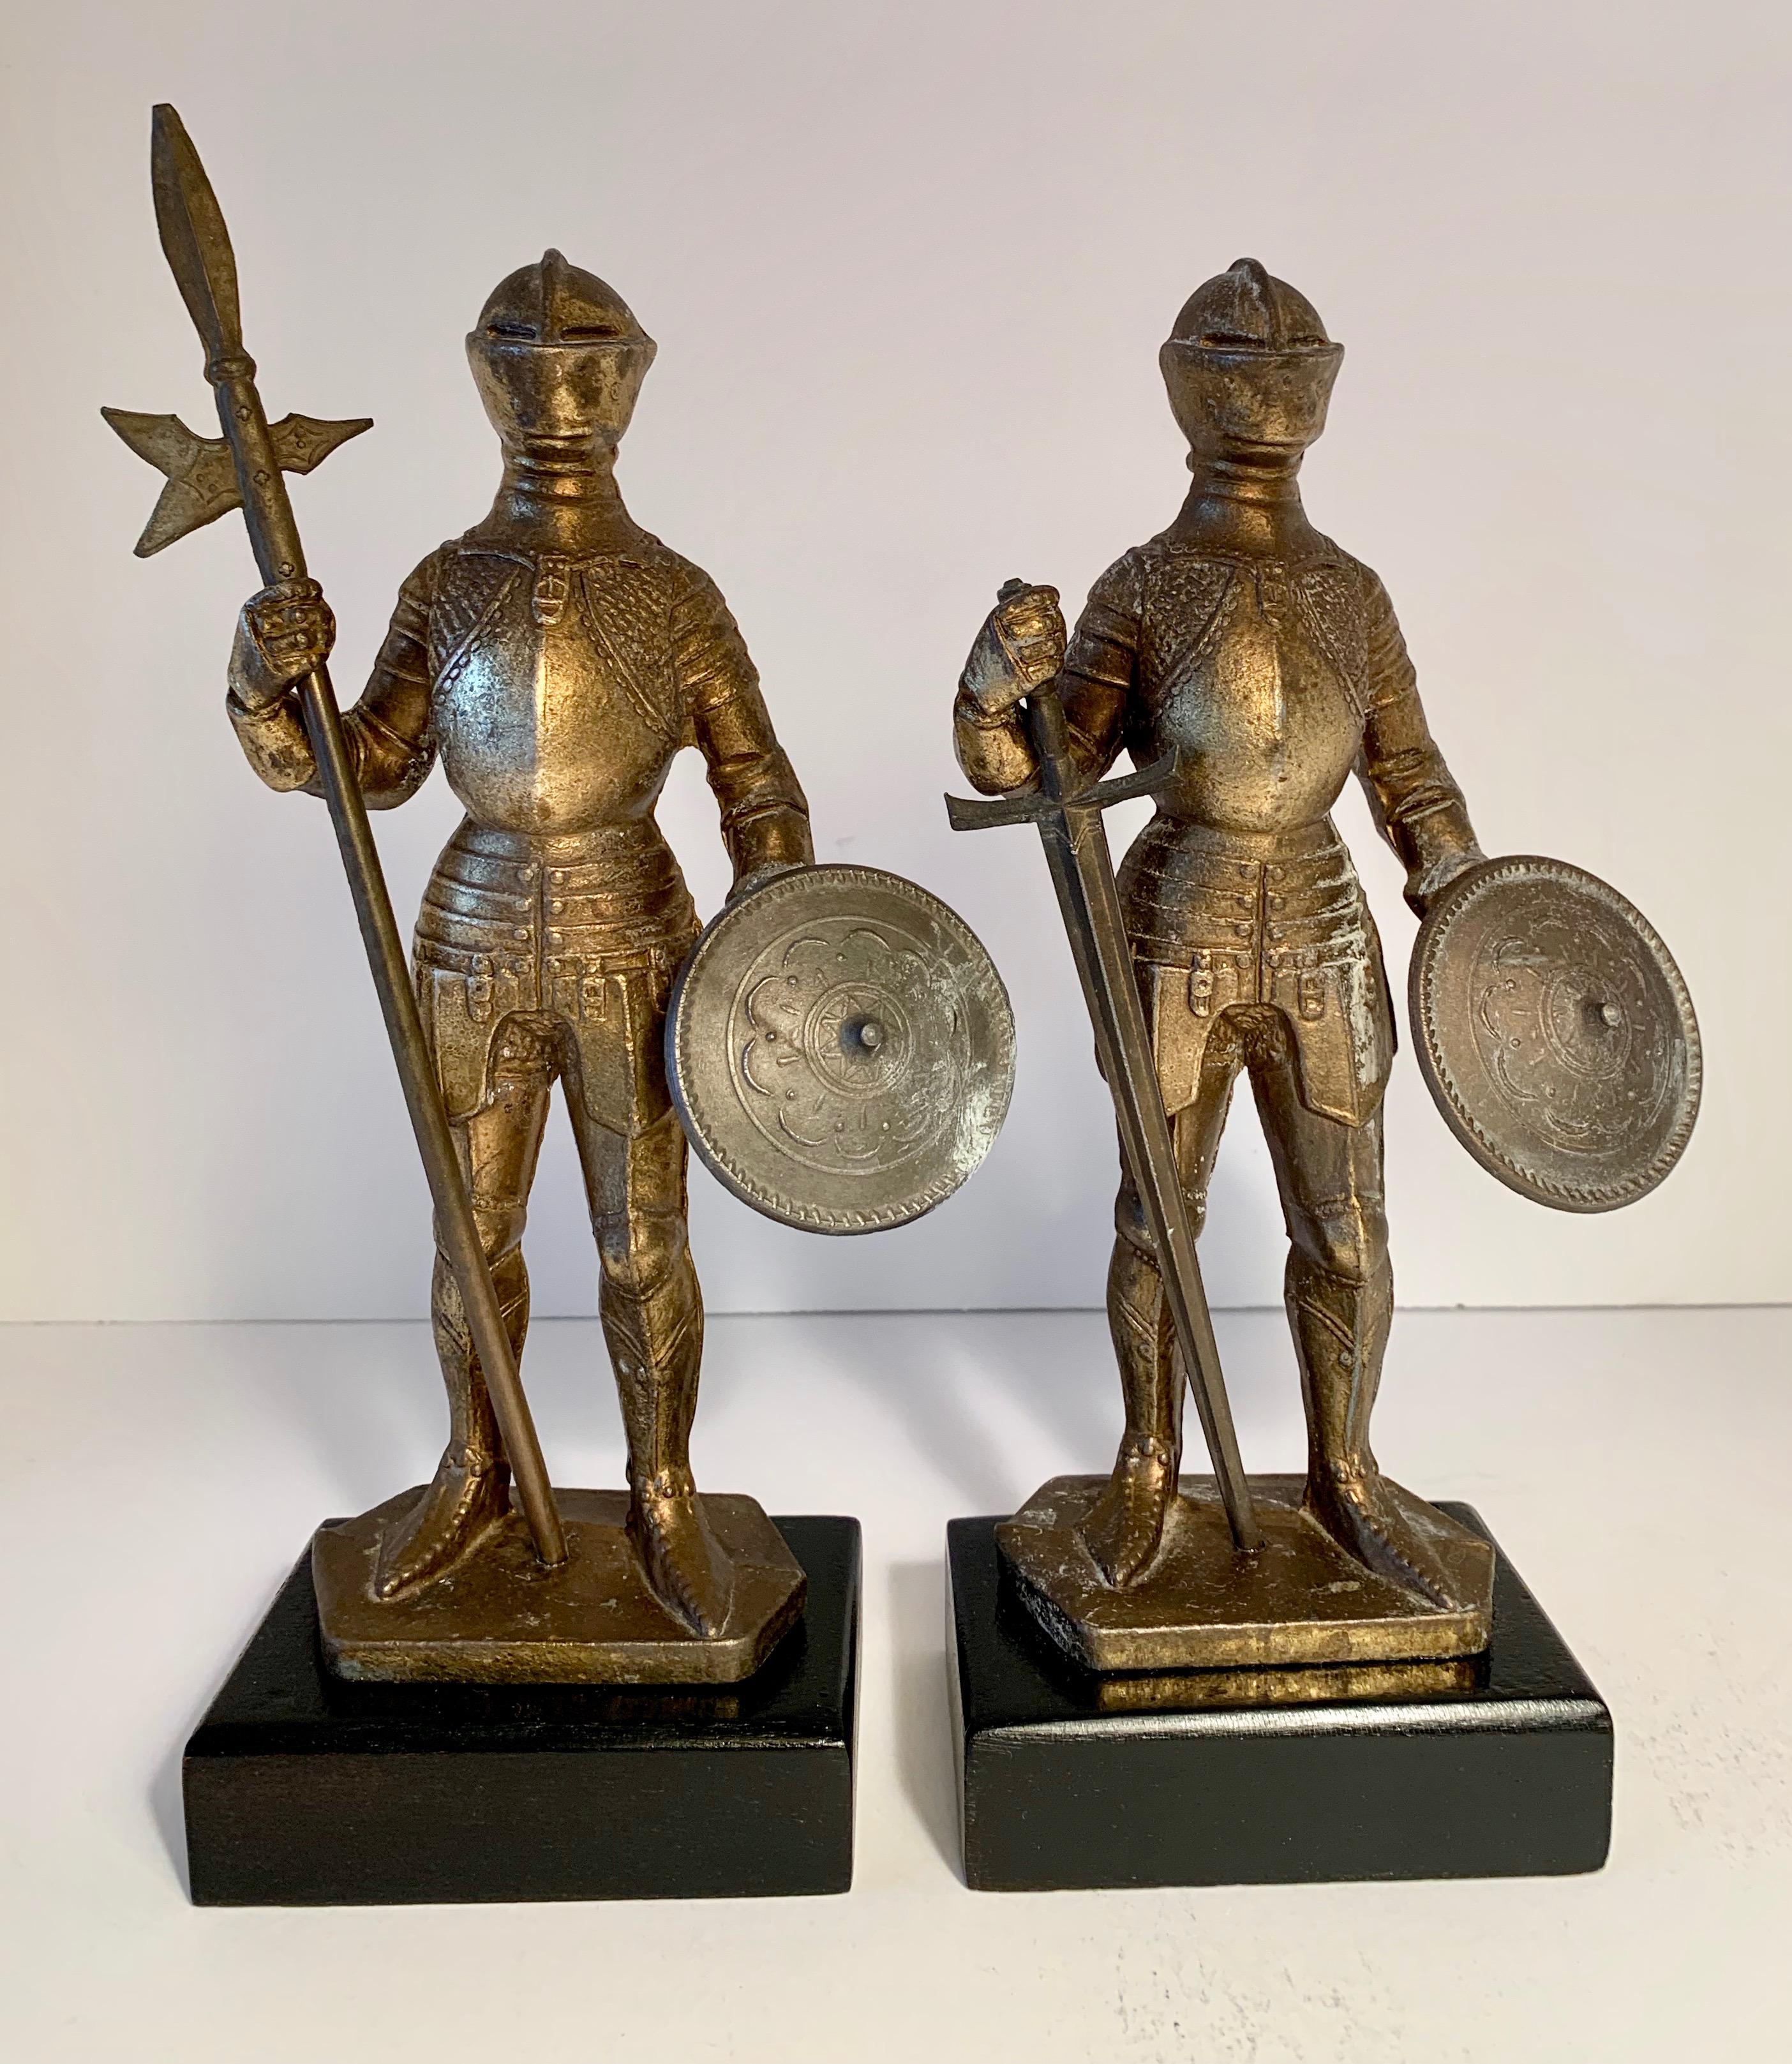 Gilt Pair of Medieval Knight Bookends